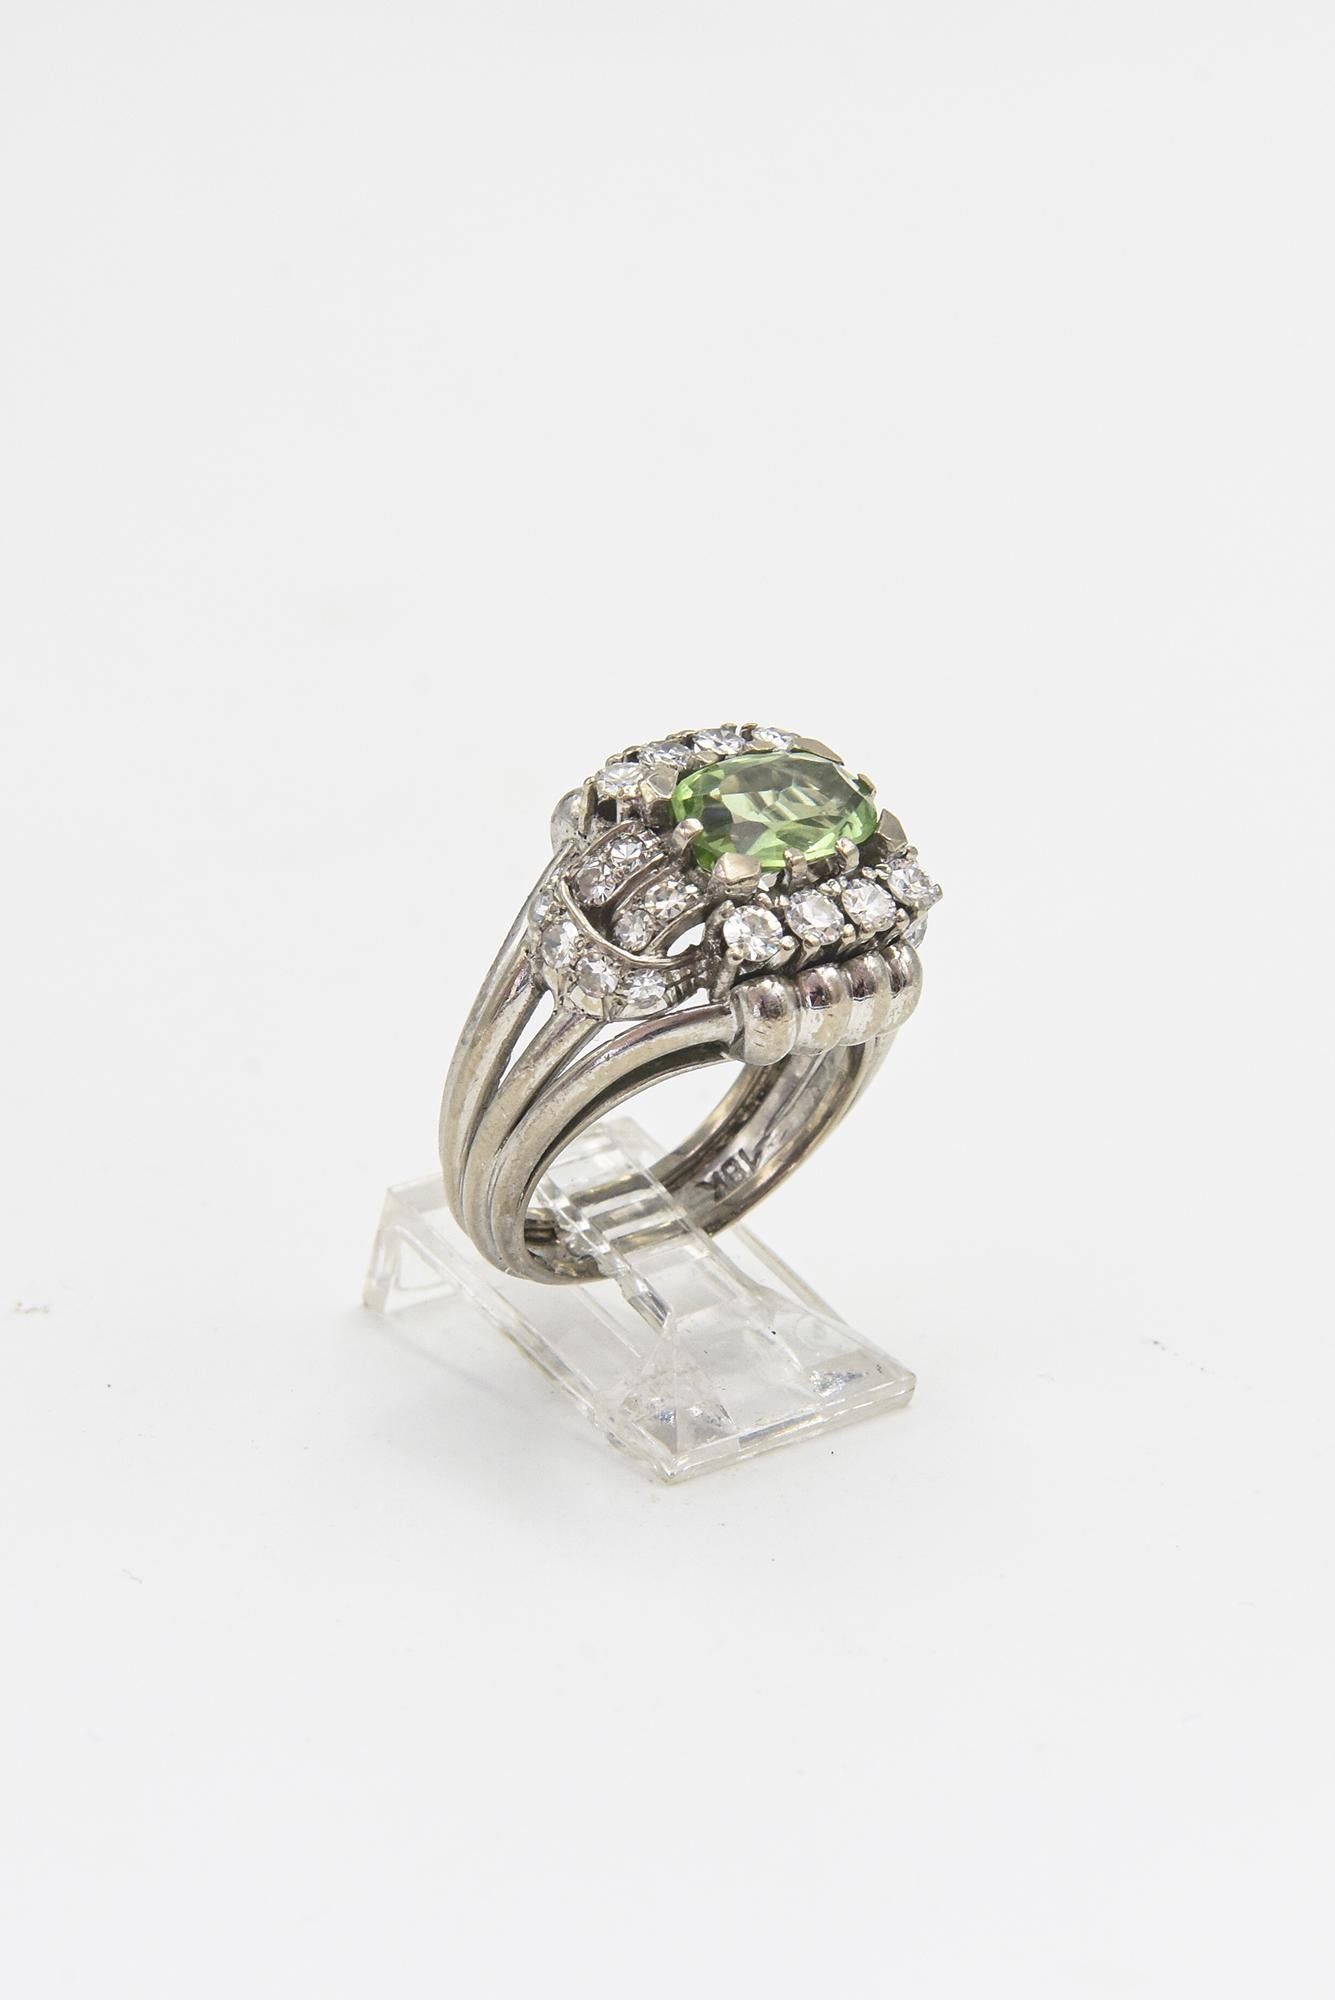 Highly stylized mid 20th century 18k white gold cocktail ring featuring an oval peridot center stone.  On the top and bottom of the peridot are 4 prong set diamonds above which is a 4 section gold roll. On the shoulders there is a diamond garland